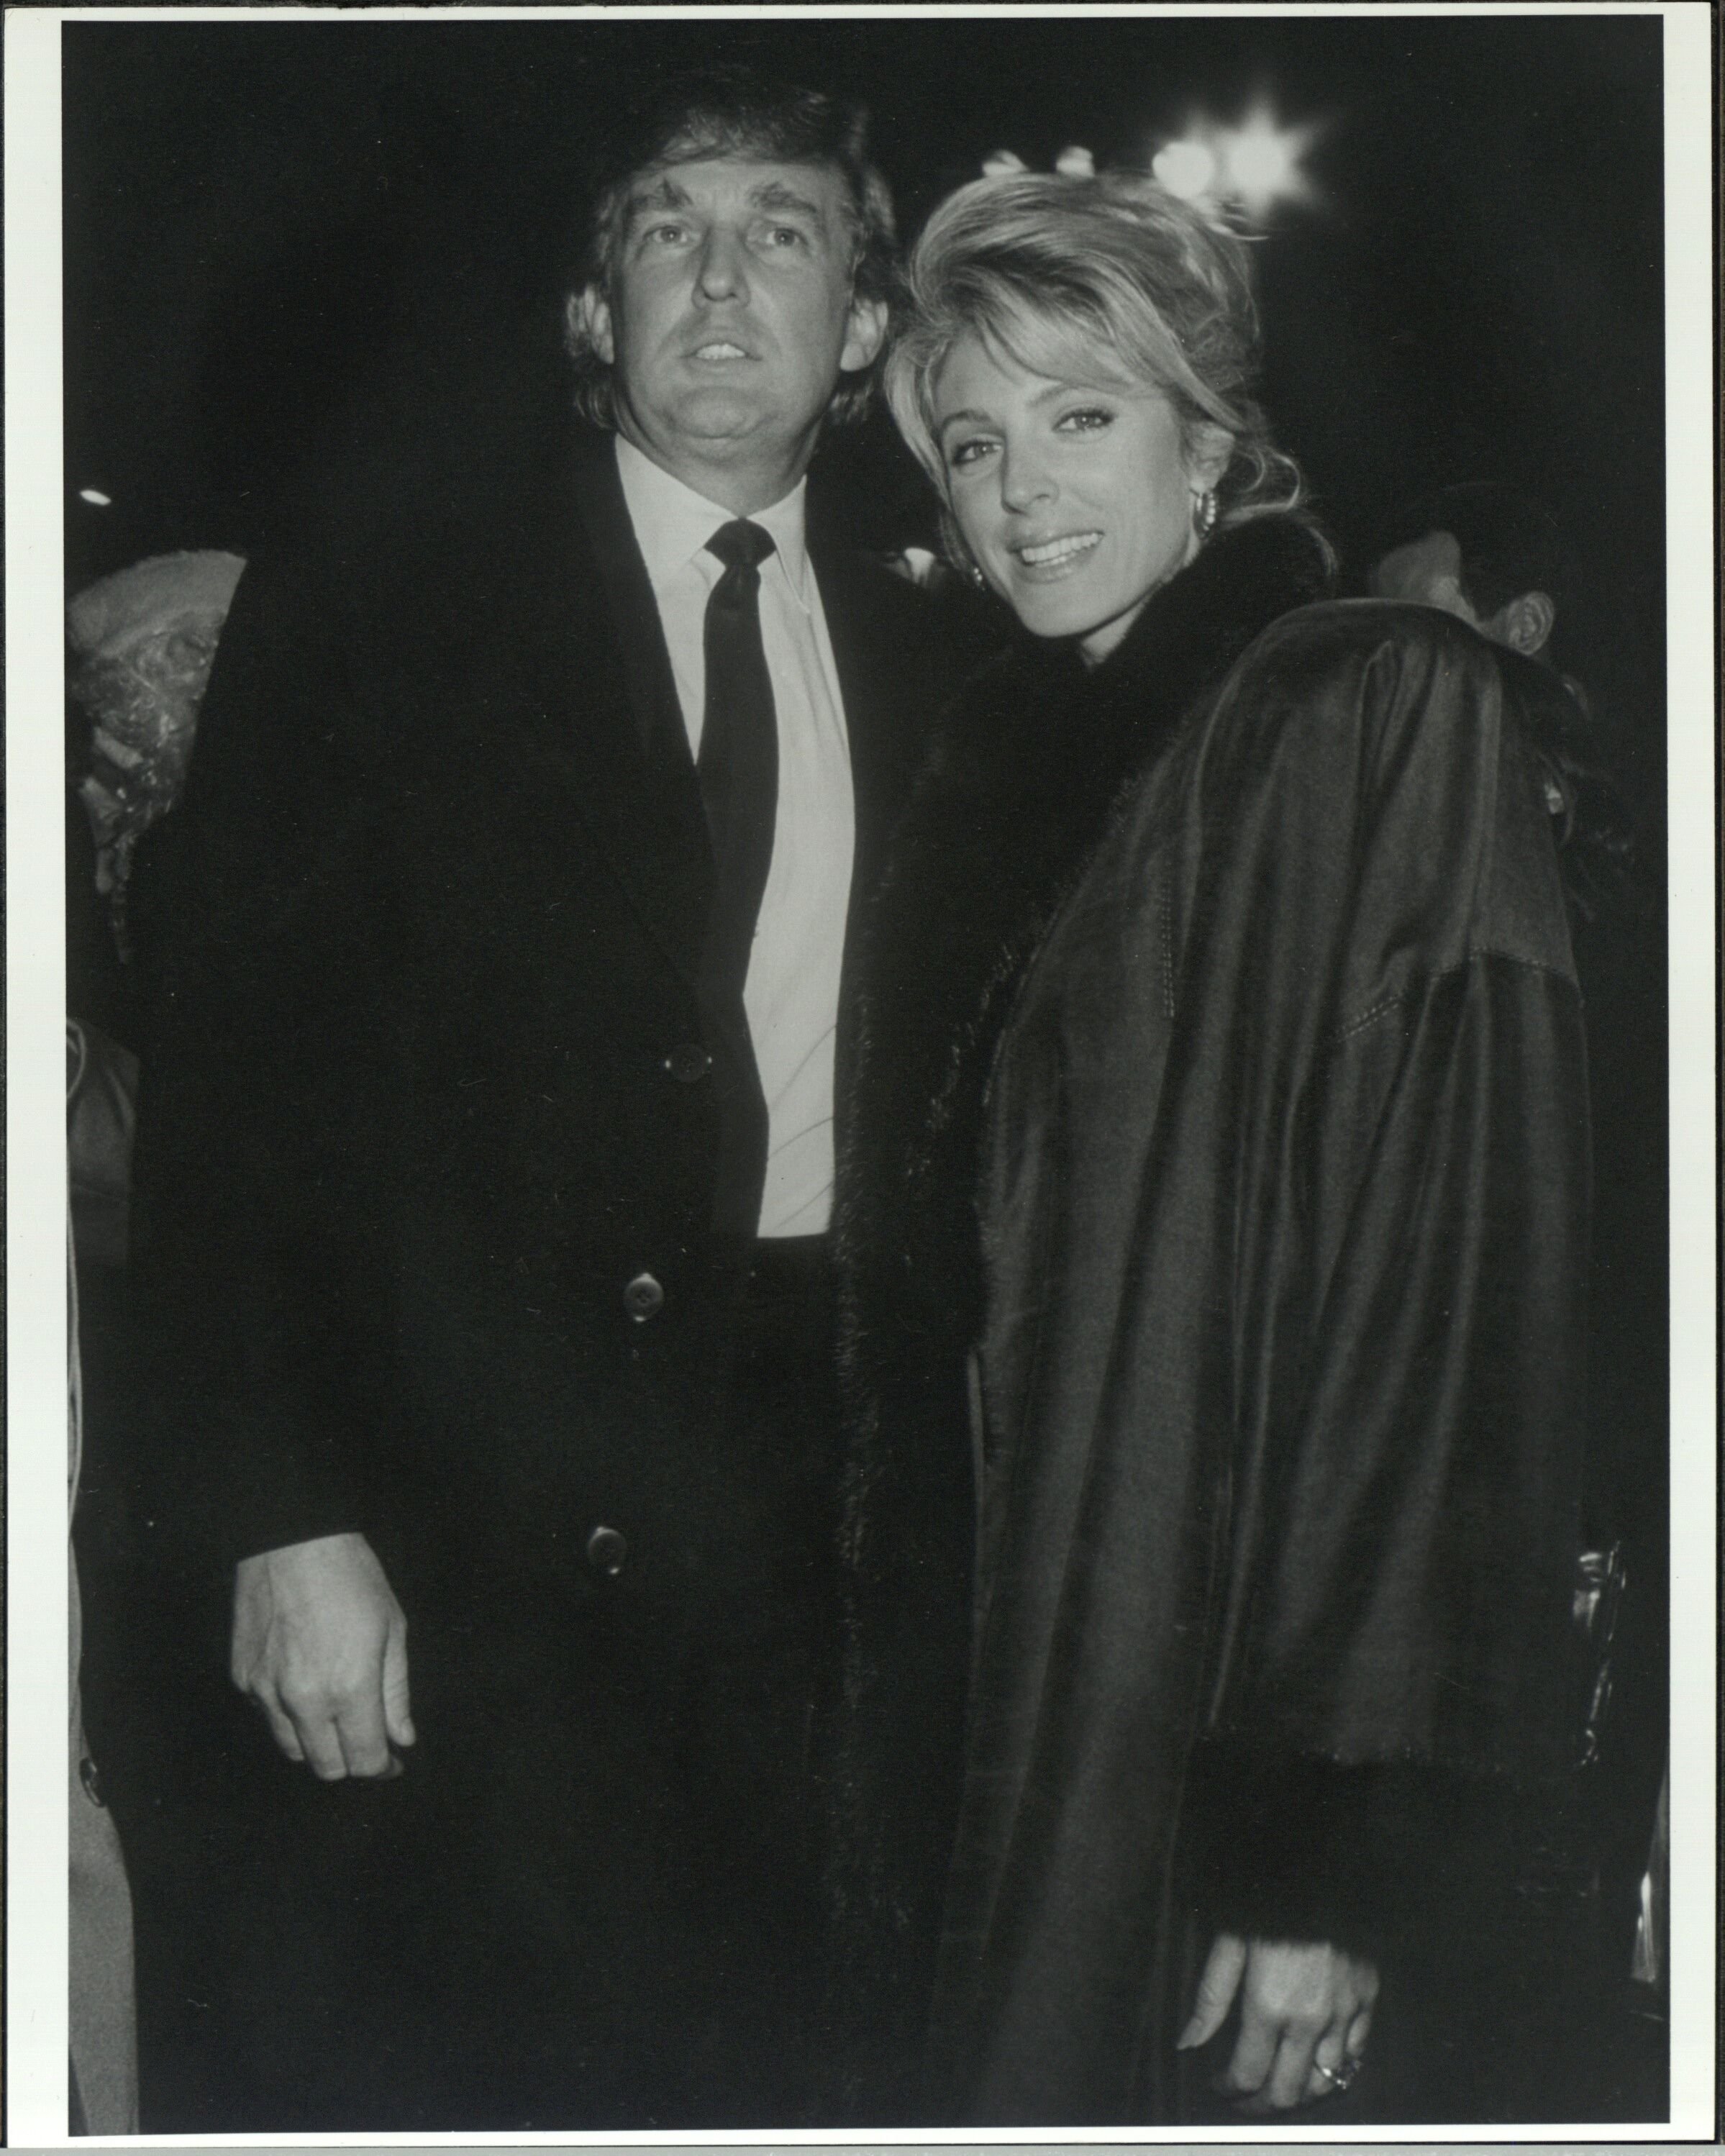 Donald Trump, Marla Maples. | Photo : Getty Images